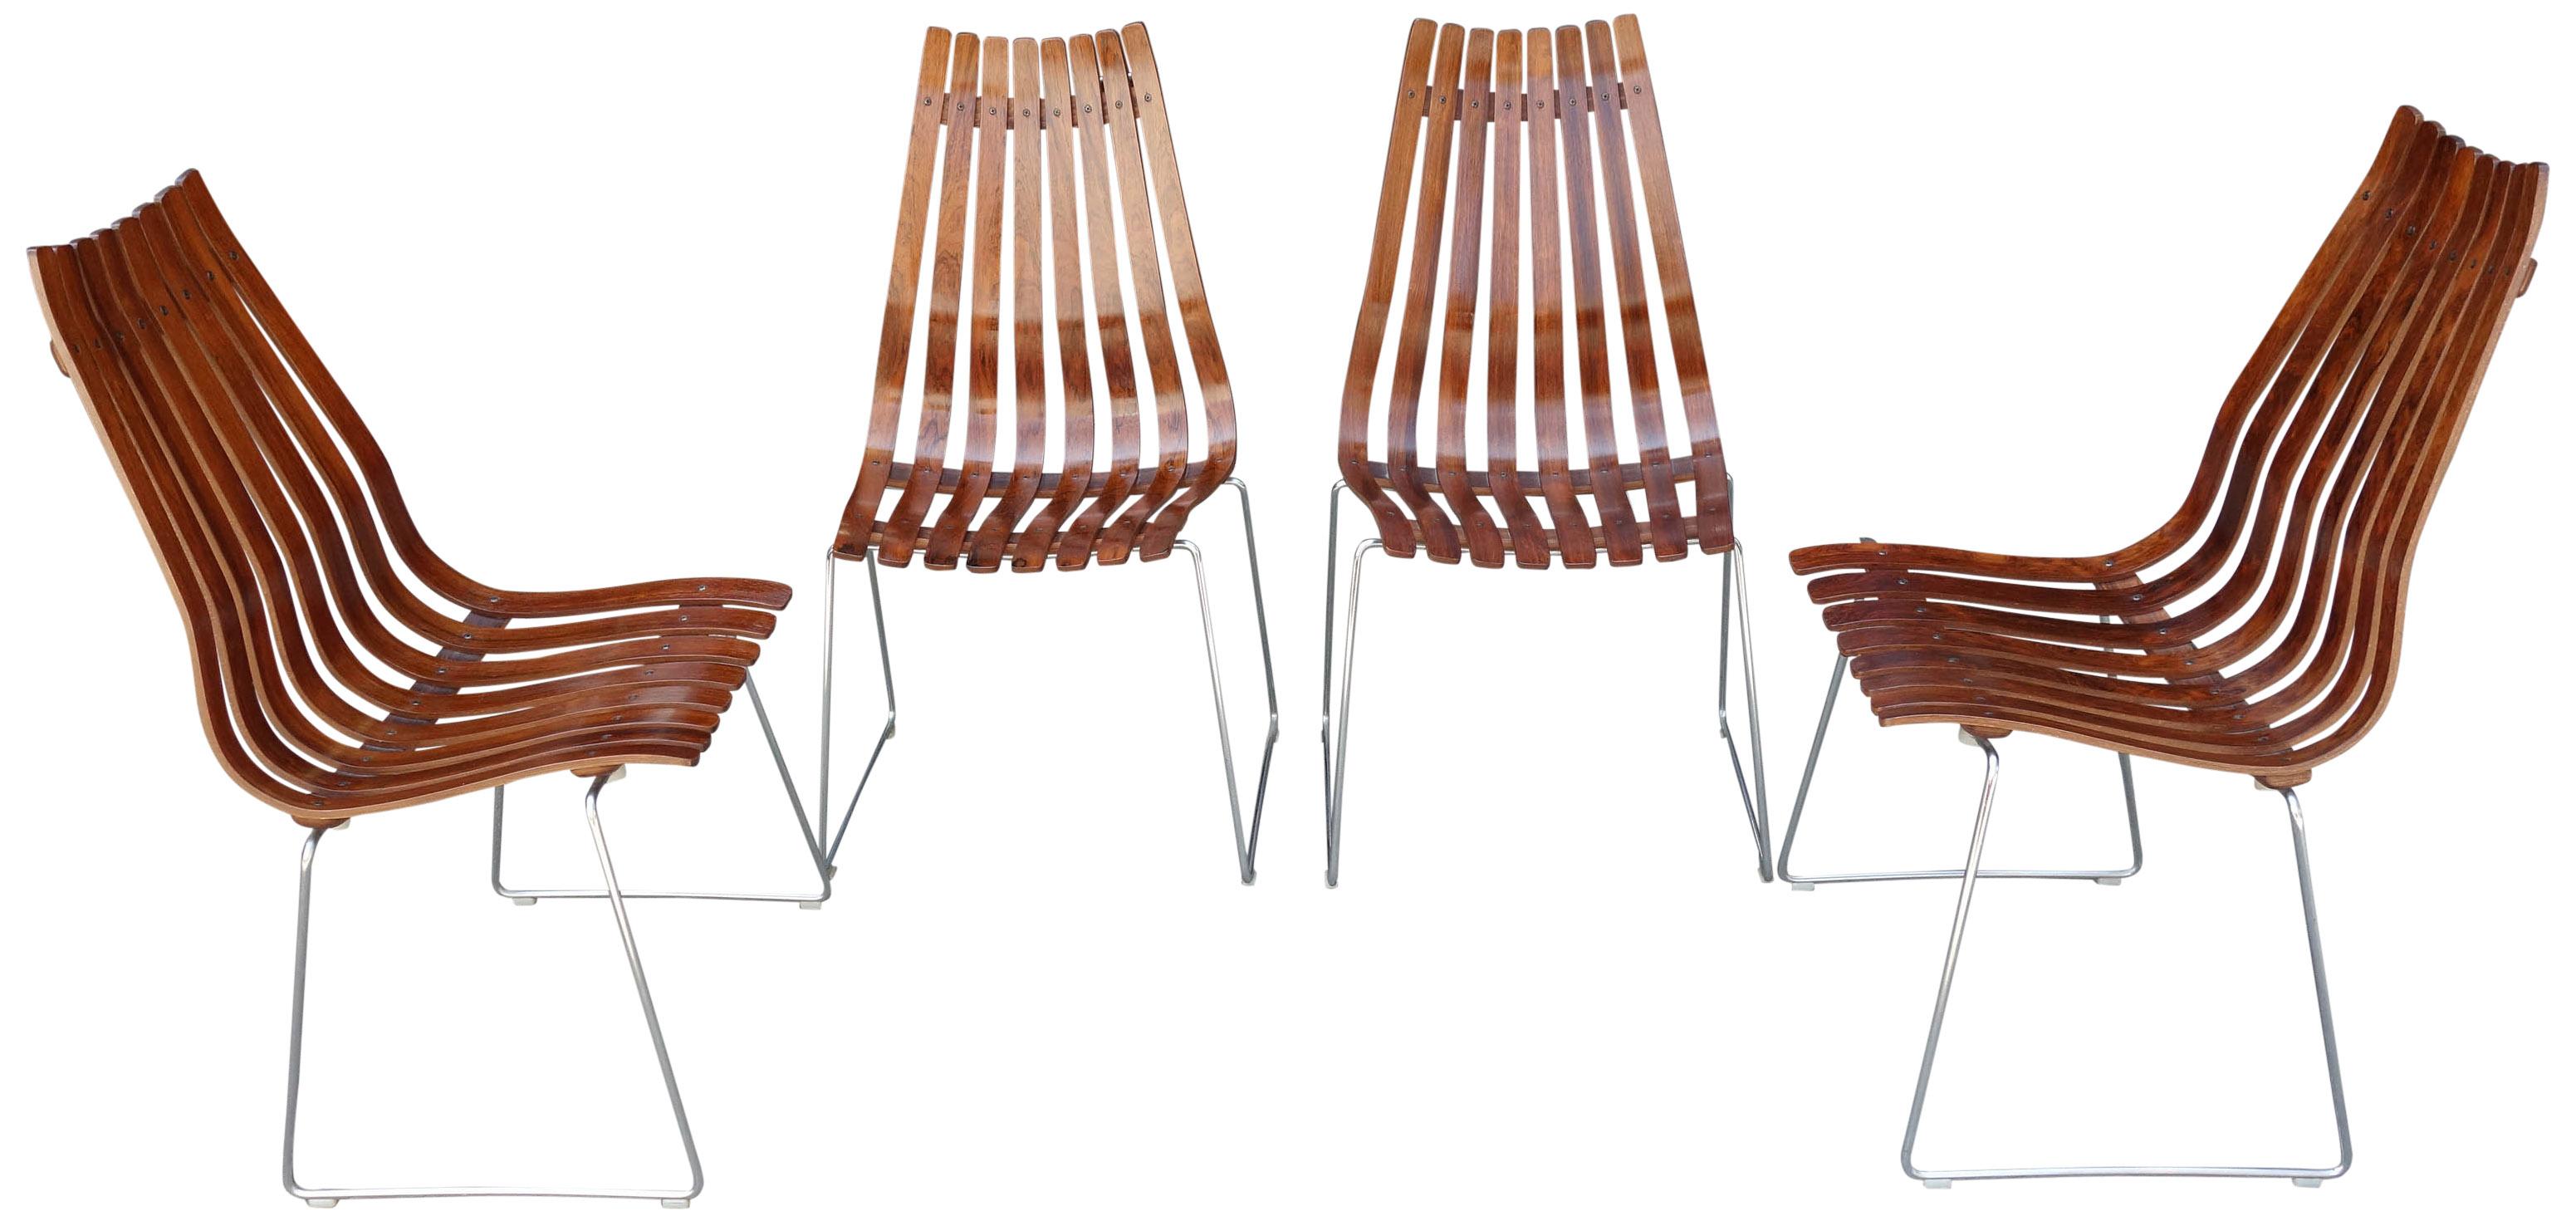 Scandinavian Modern Midcentury Scandia Chairs by Hans Brattrud for Hove Mobler